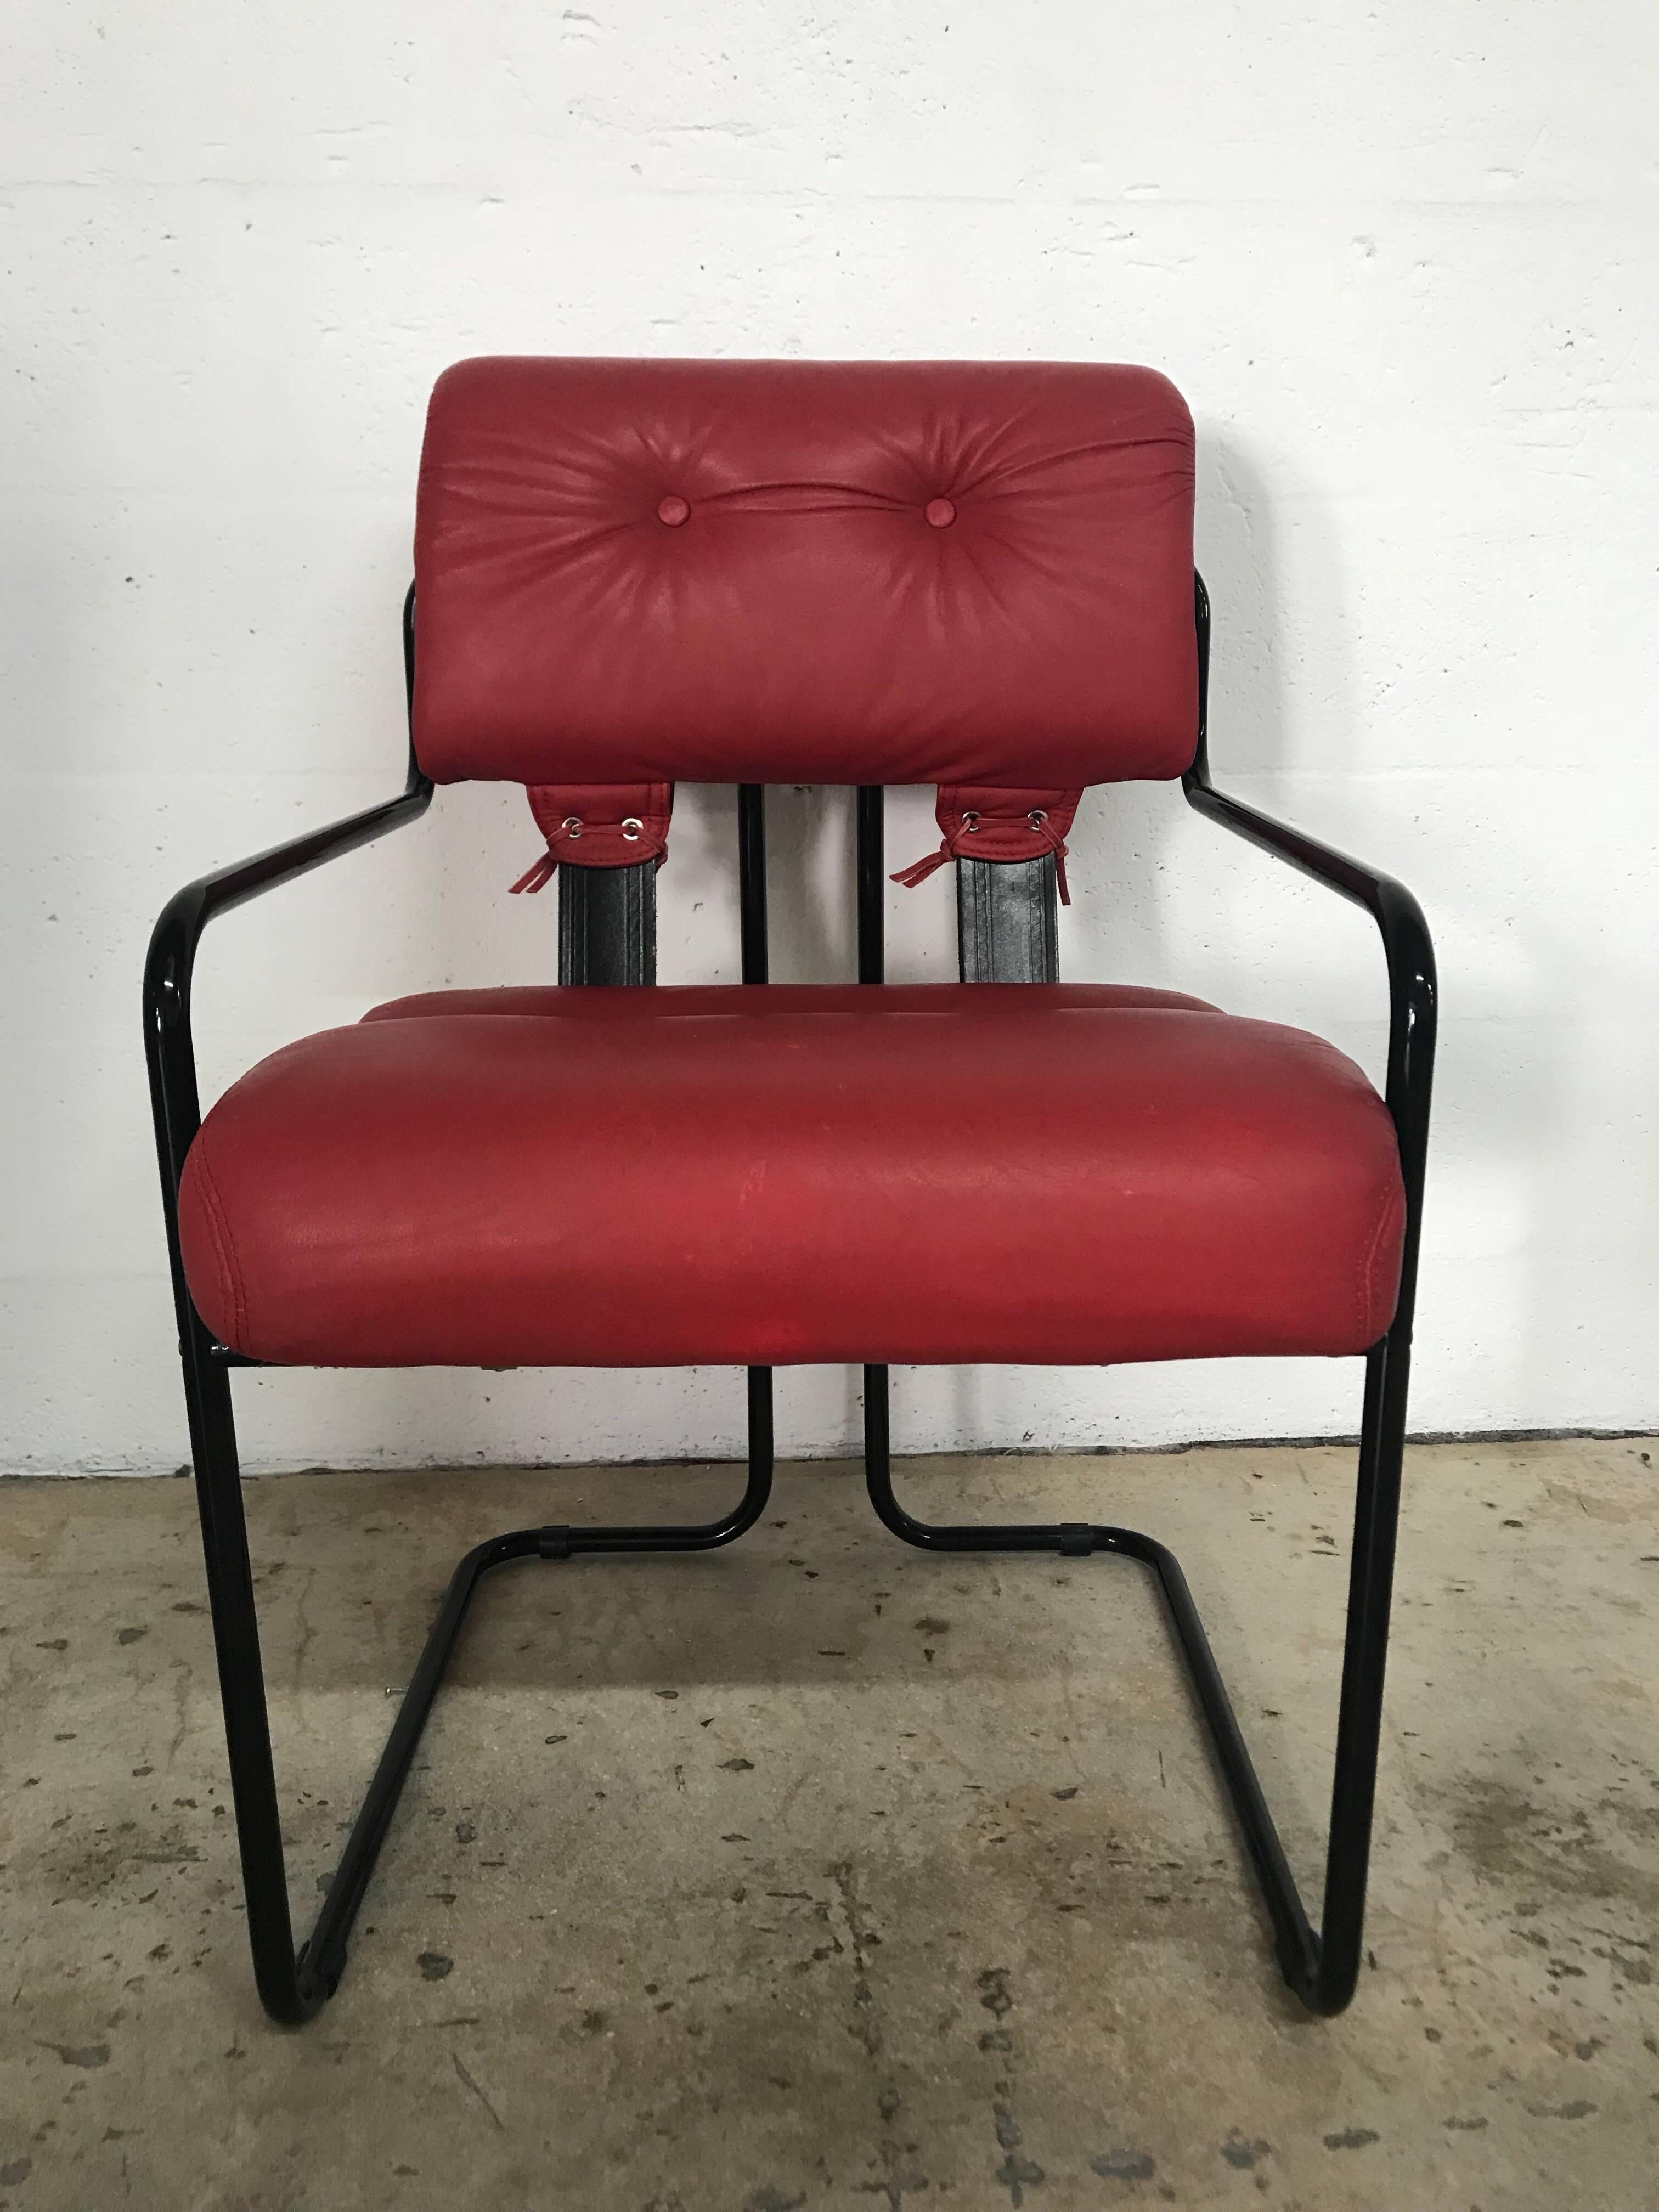 Rare black enameled dining chairs with red leather seats and back designed by Guido Faleschini for Pace Collection and manufactured by i4 Mariani in Italy.